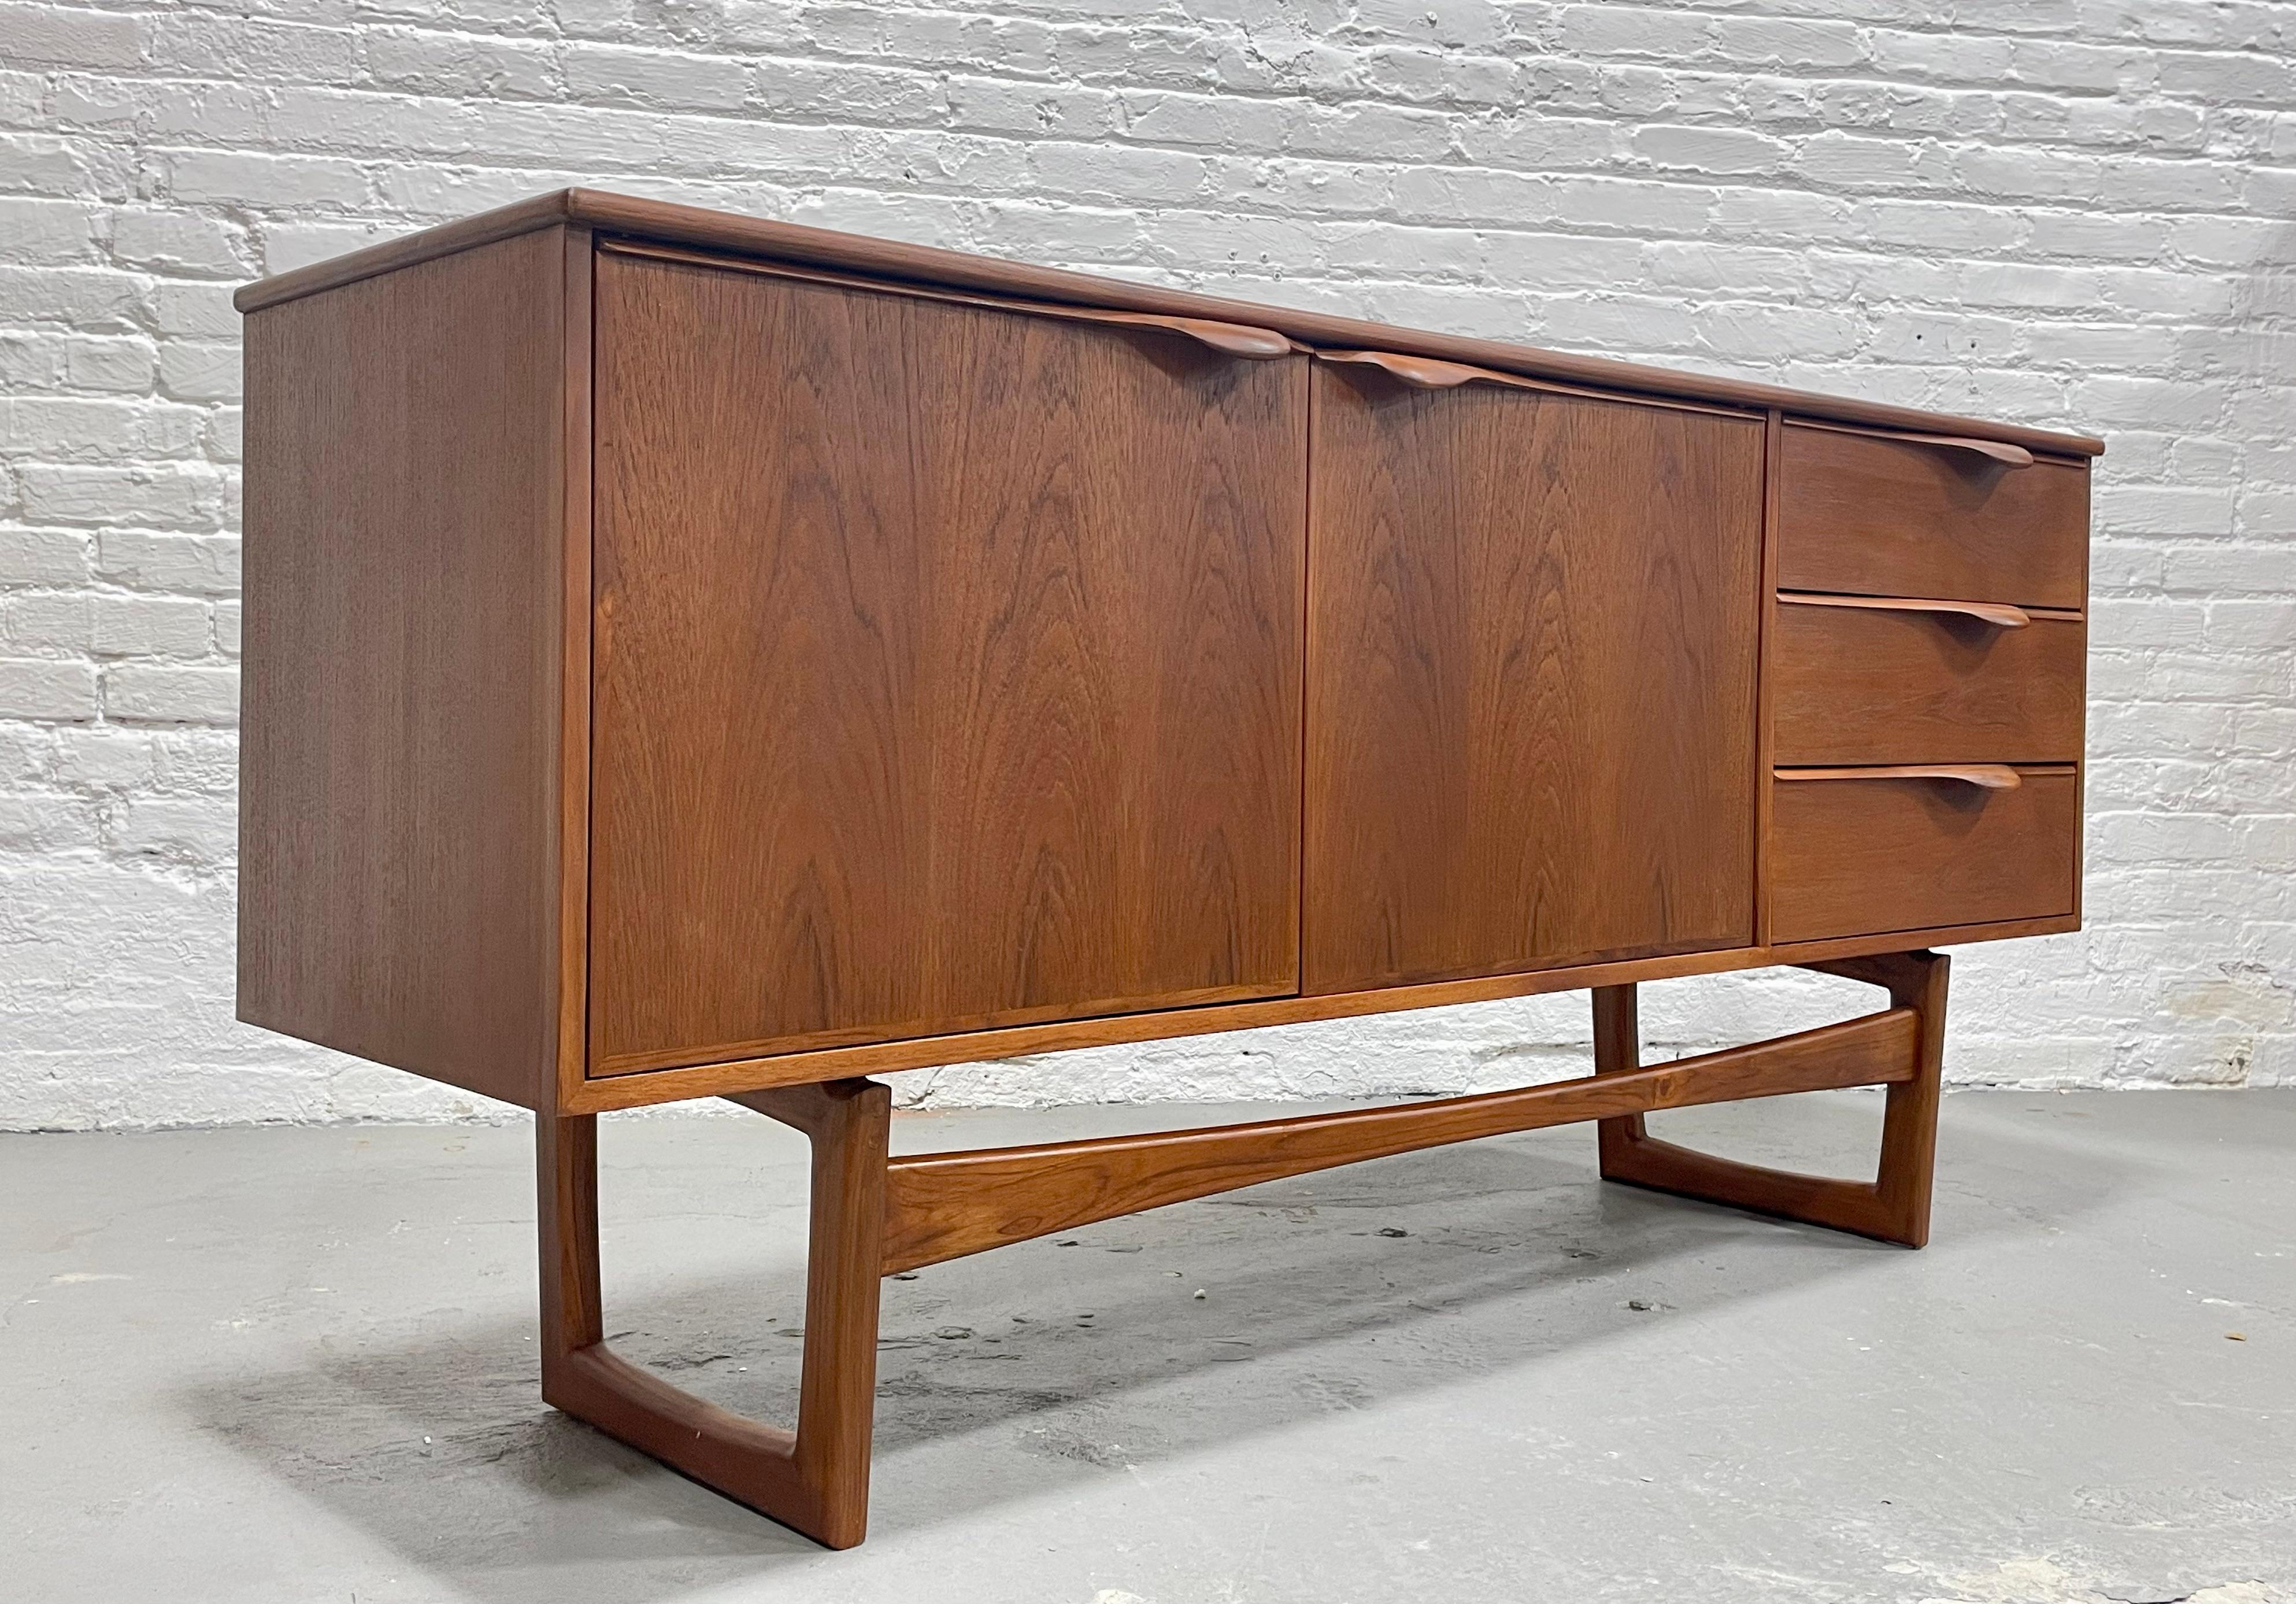 Sculptural Mid-Century Modern styled credenza / media stand with incredible hand pulls and the best square leg base. This credenza features three deep + spacious drawers and two shelving areas, each with an adjustable (to three interior heights) and